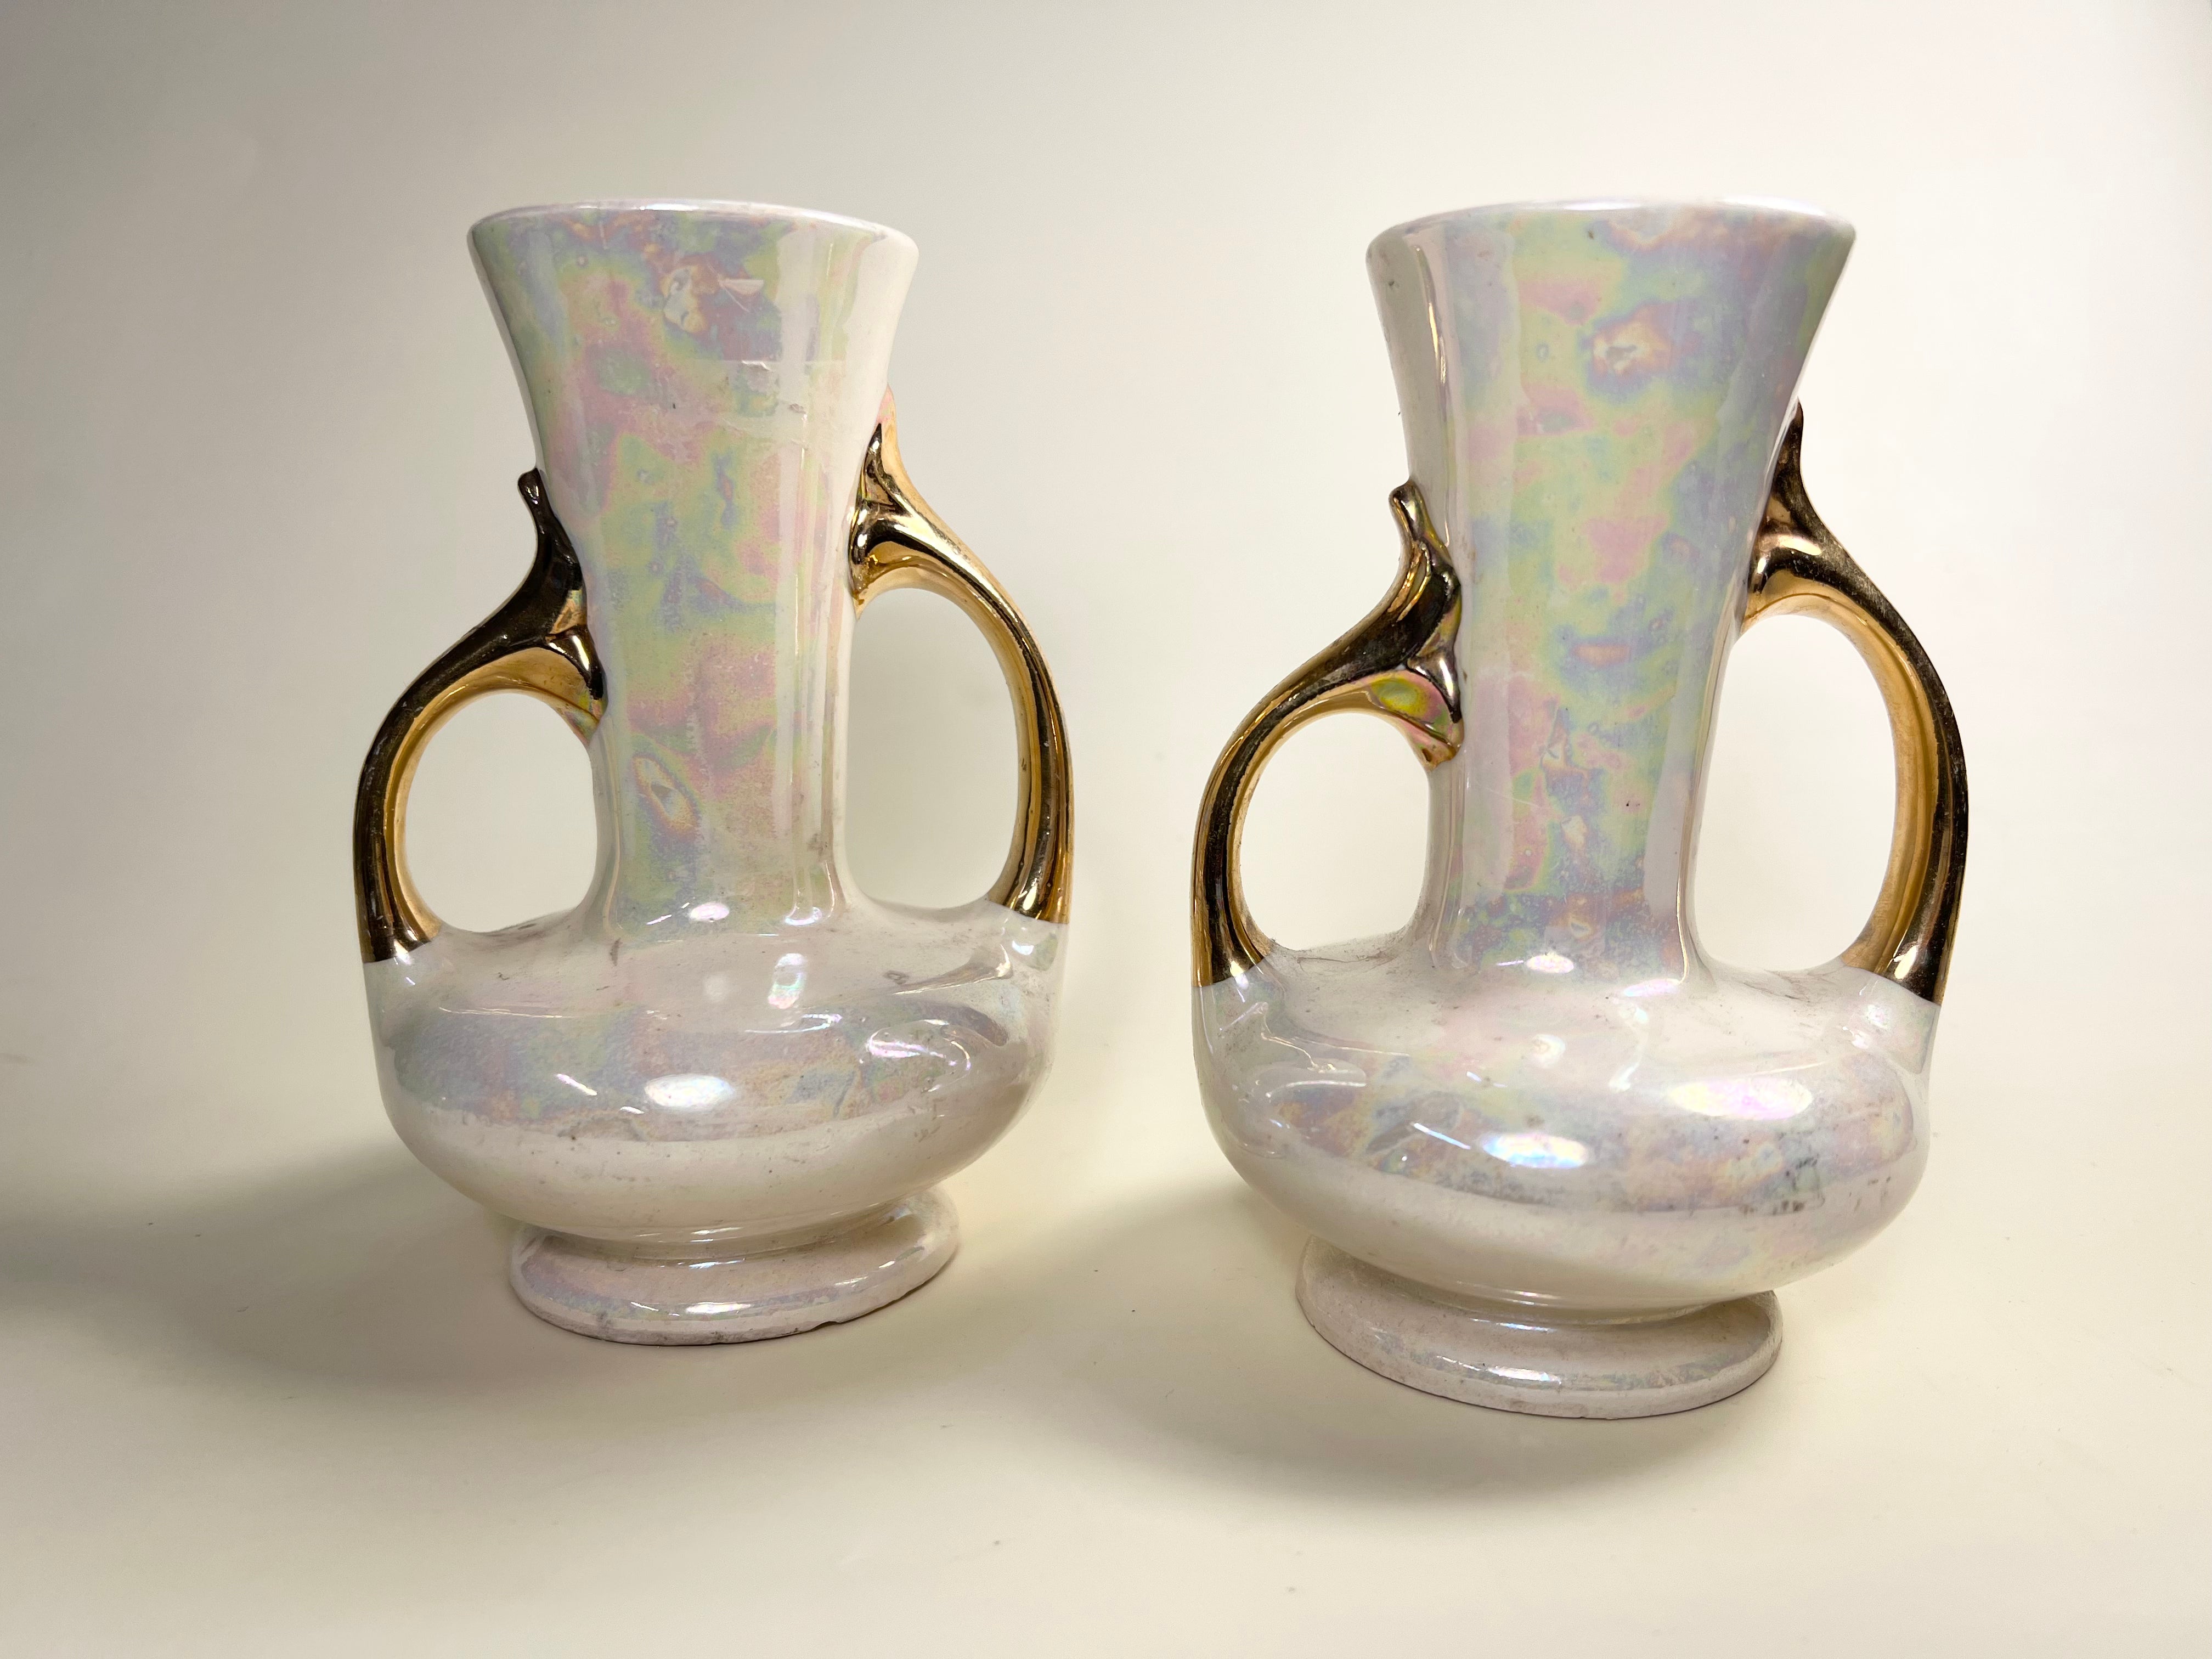 Pair of Iridescent Luster Vases with Gold Handles